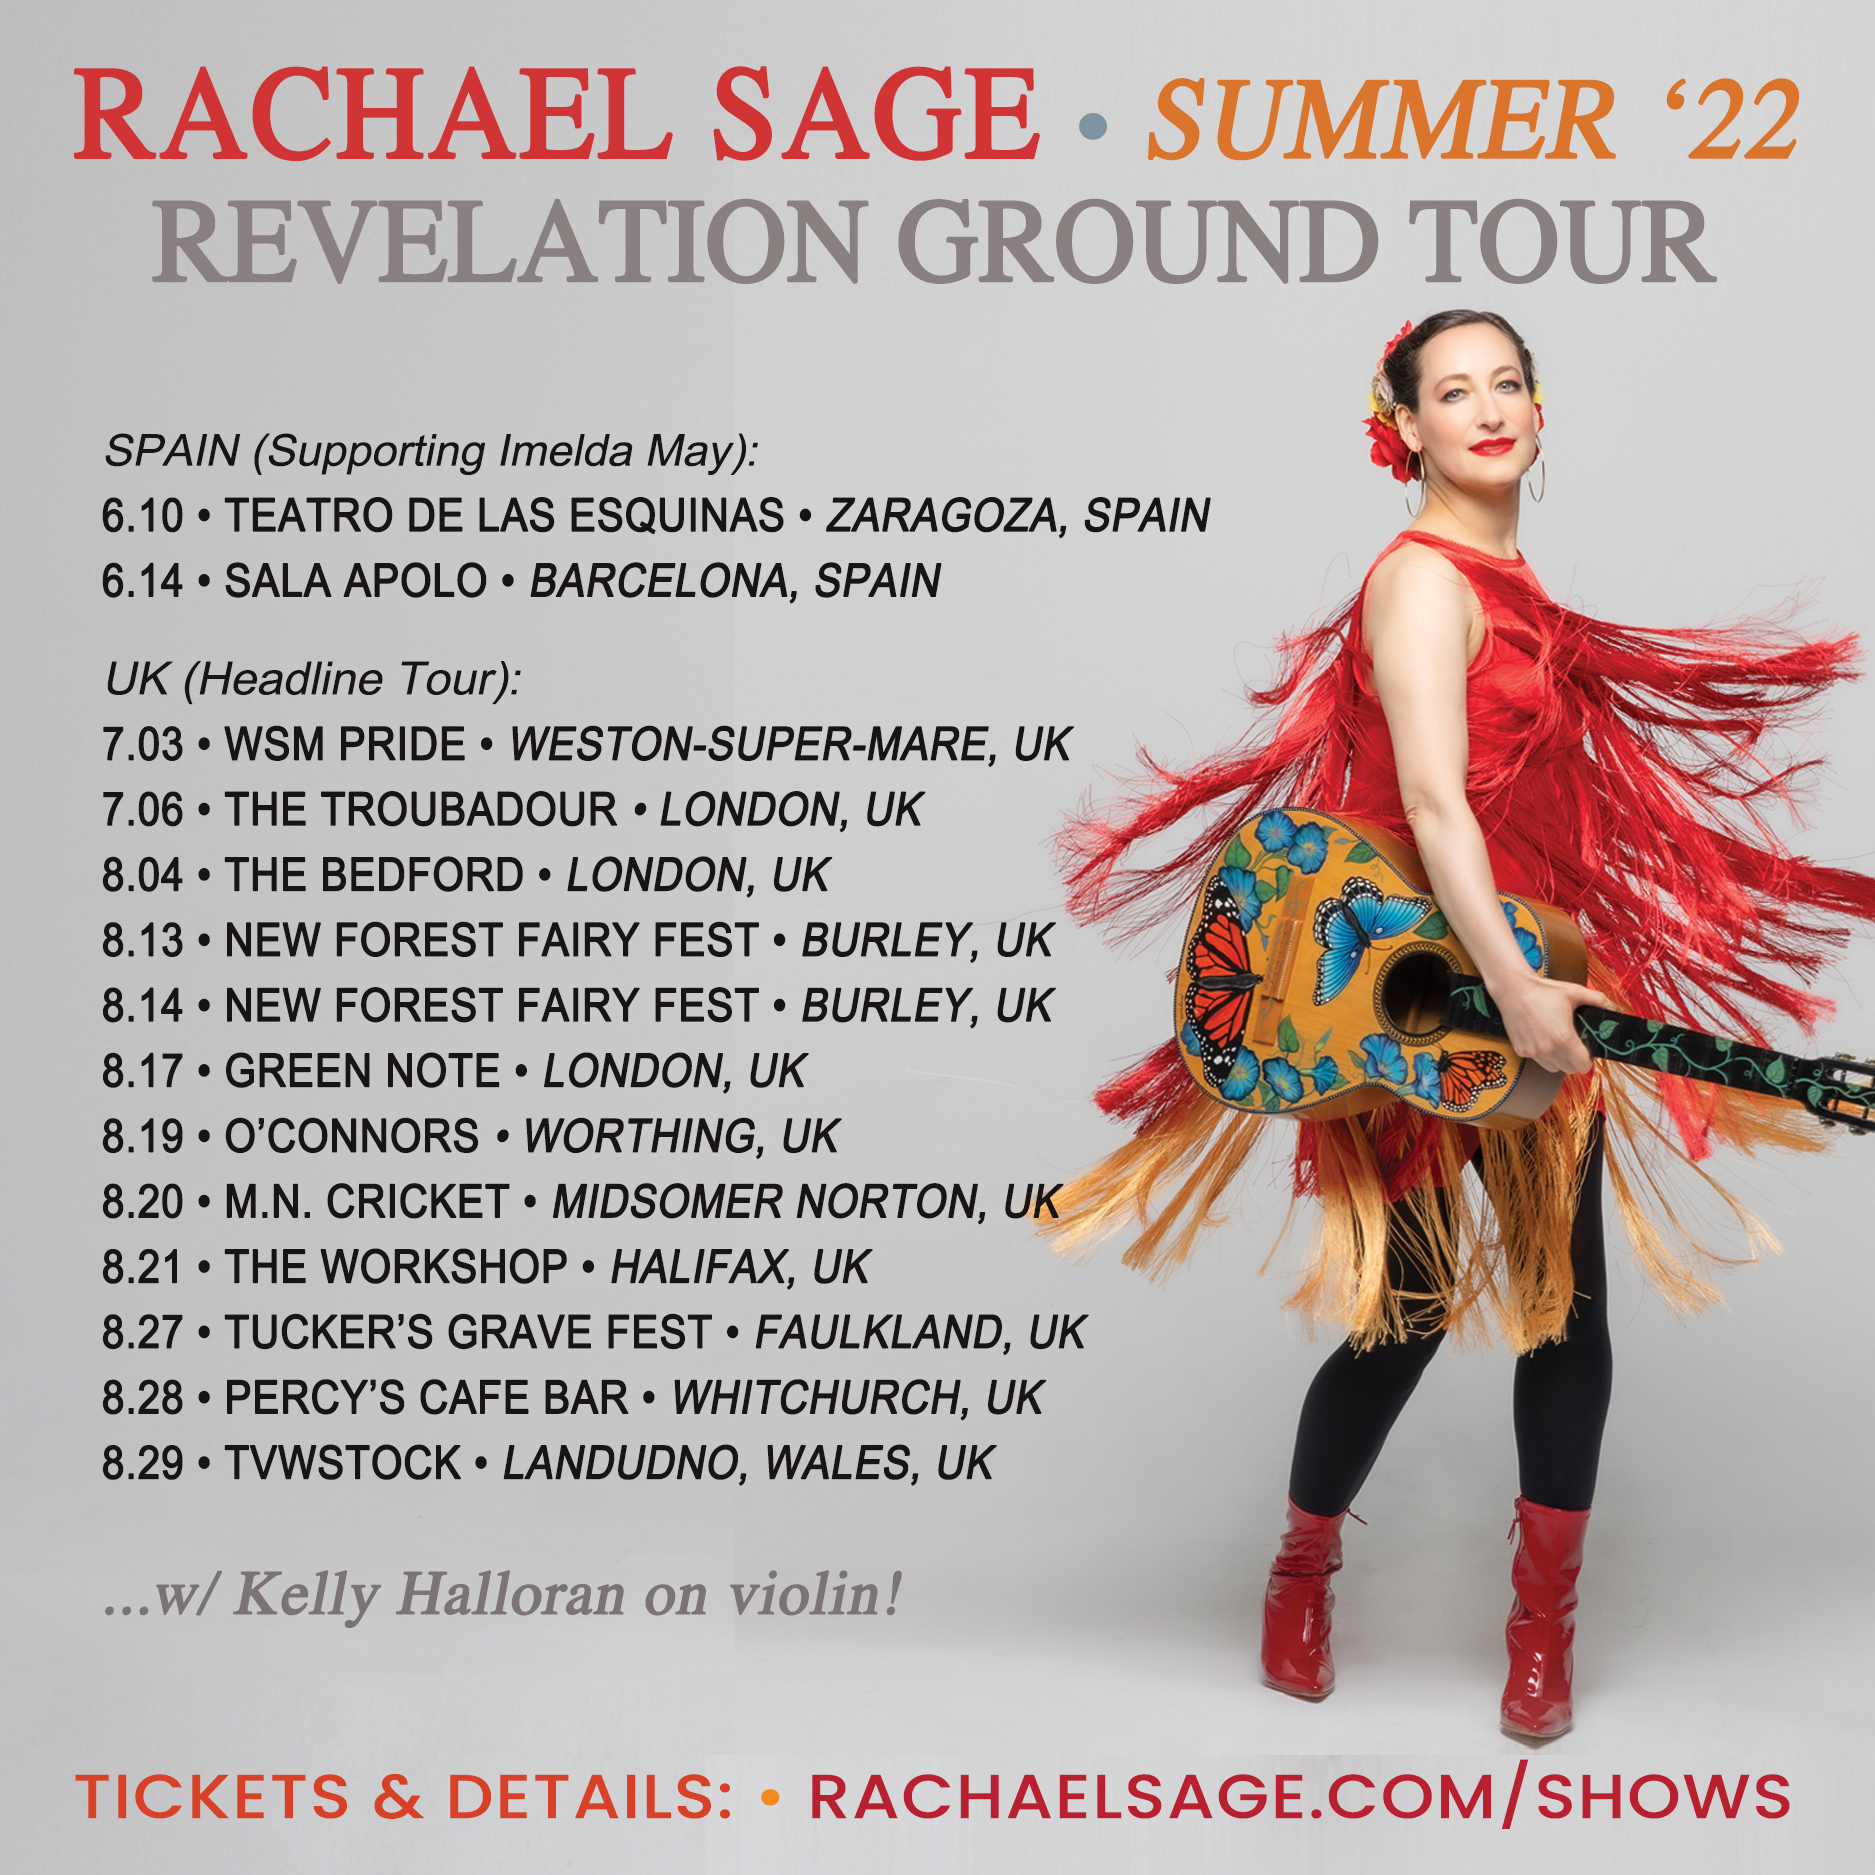 Rachael Sage On Tour Supporting Imelda May In Spain, June 2022